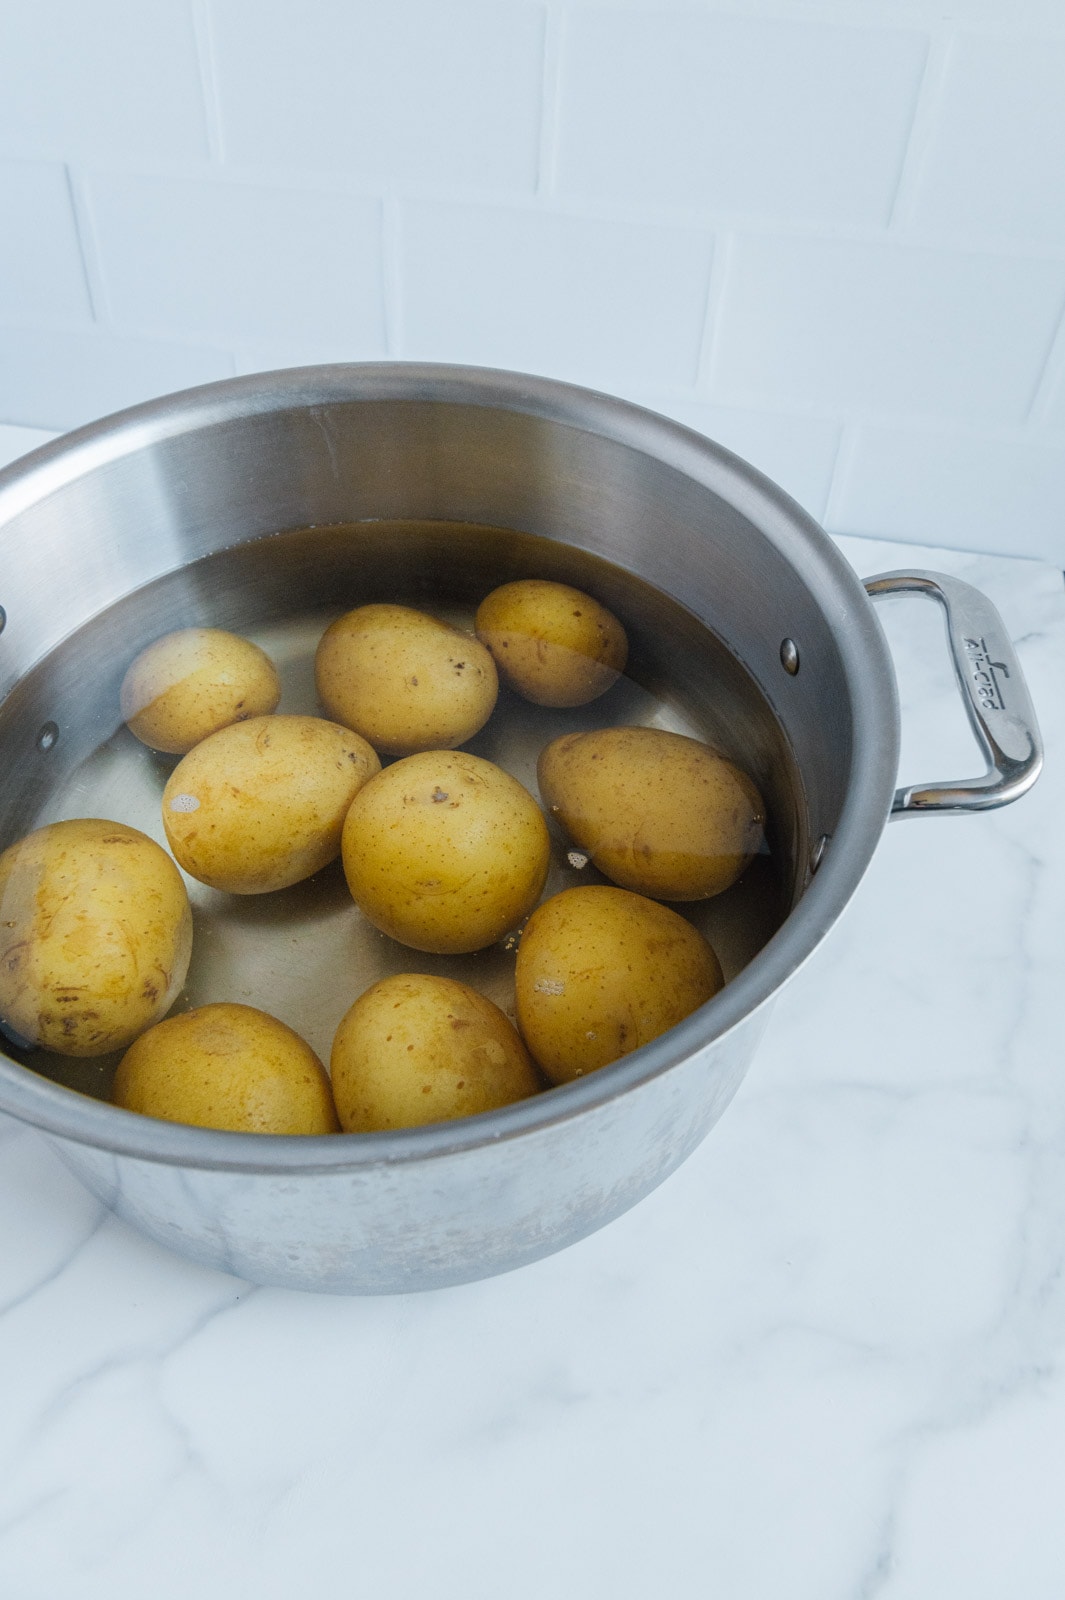 Gold Yukon potatoes cooking in a pot of water.